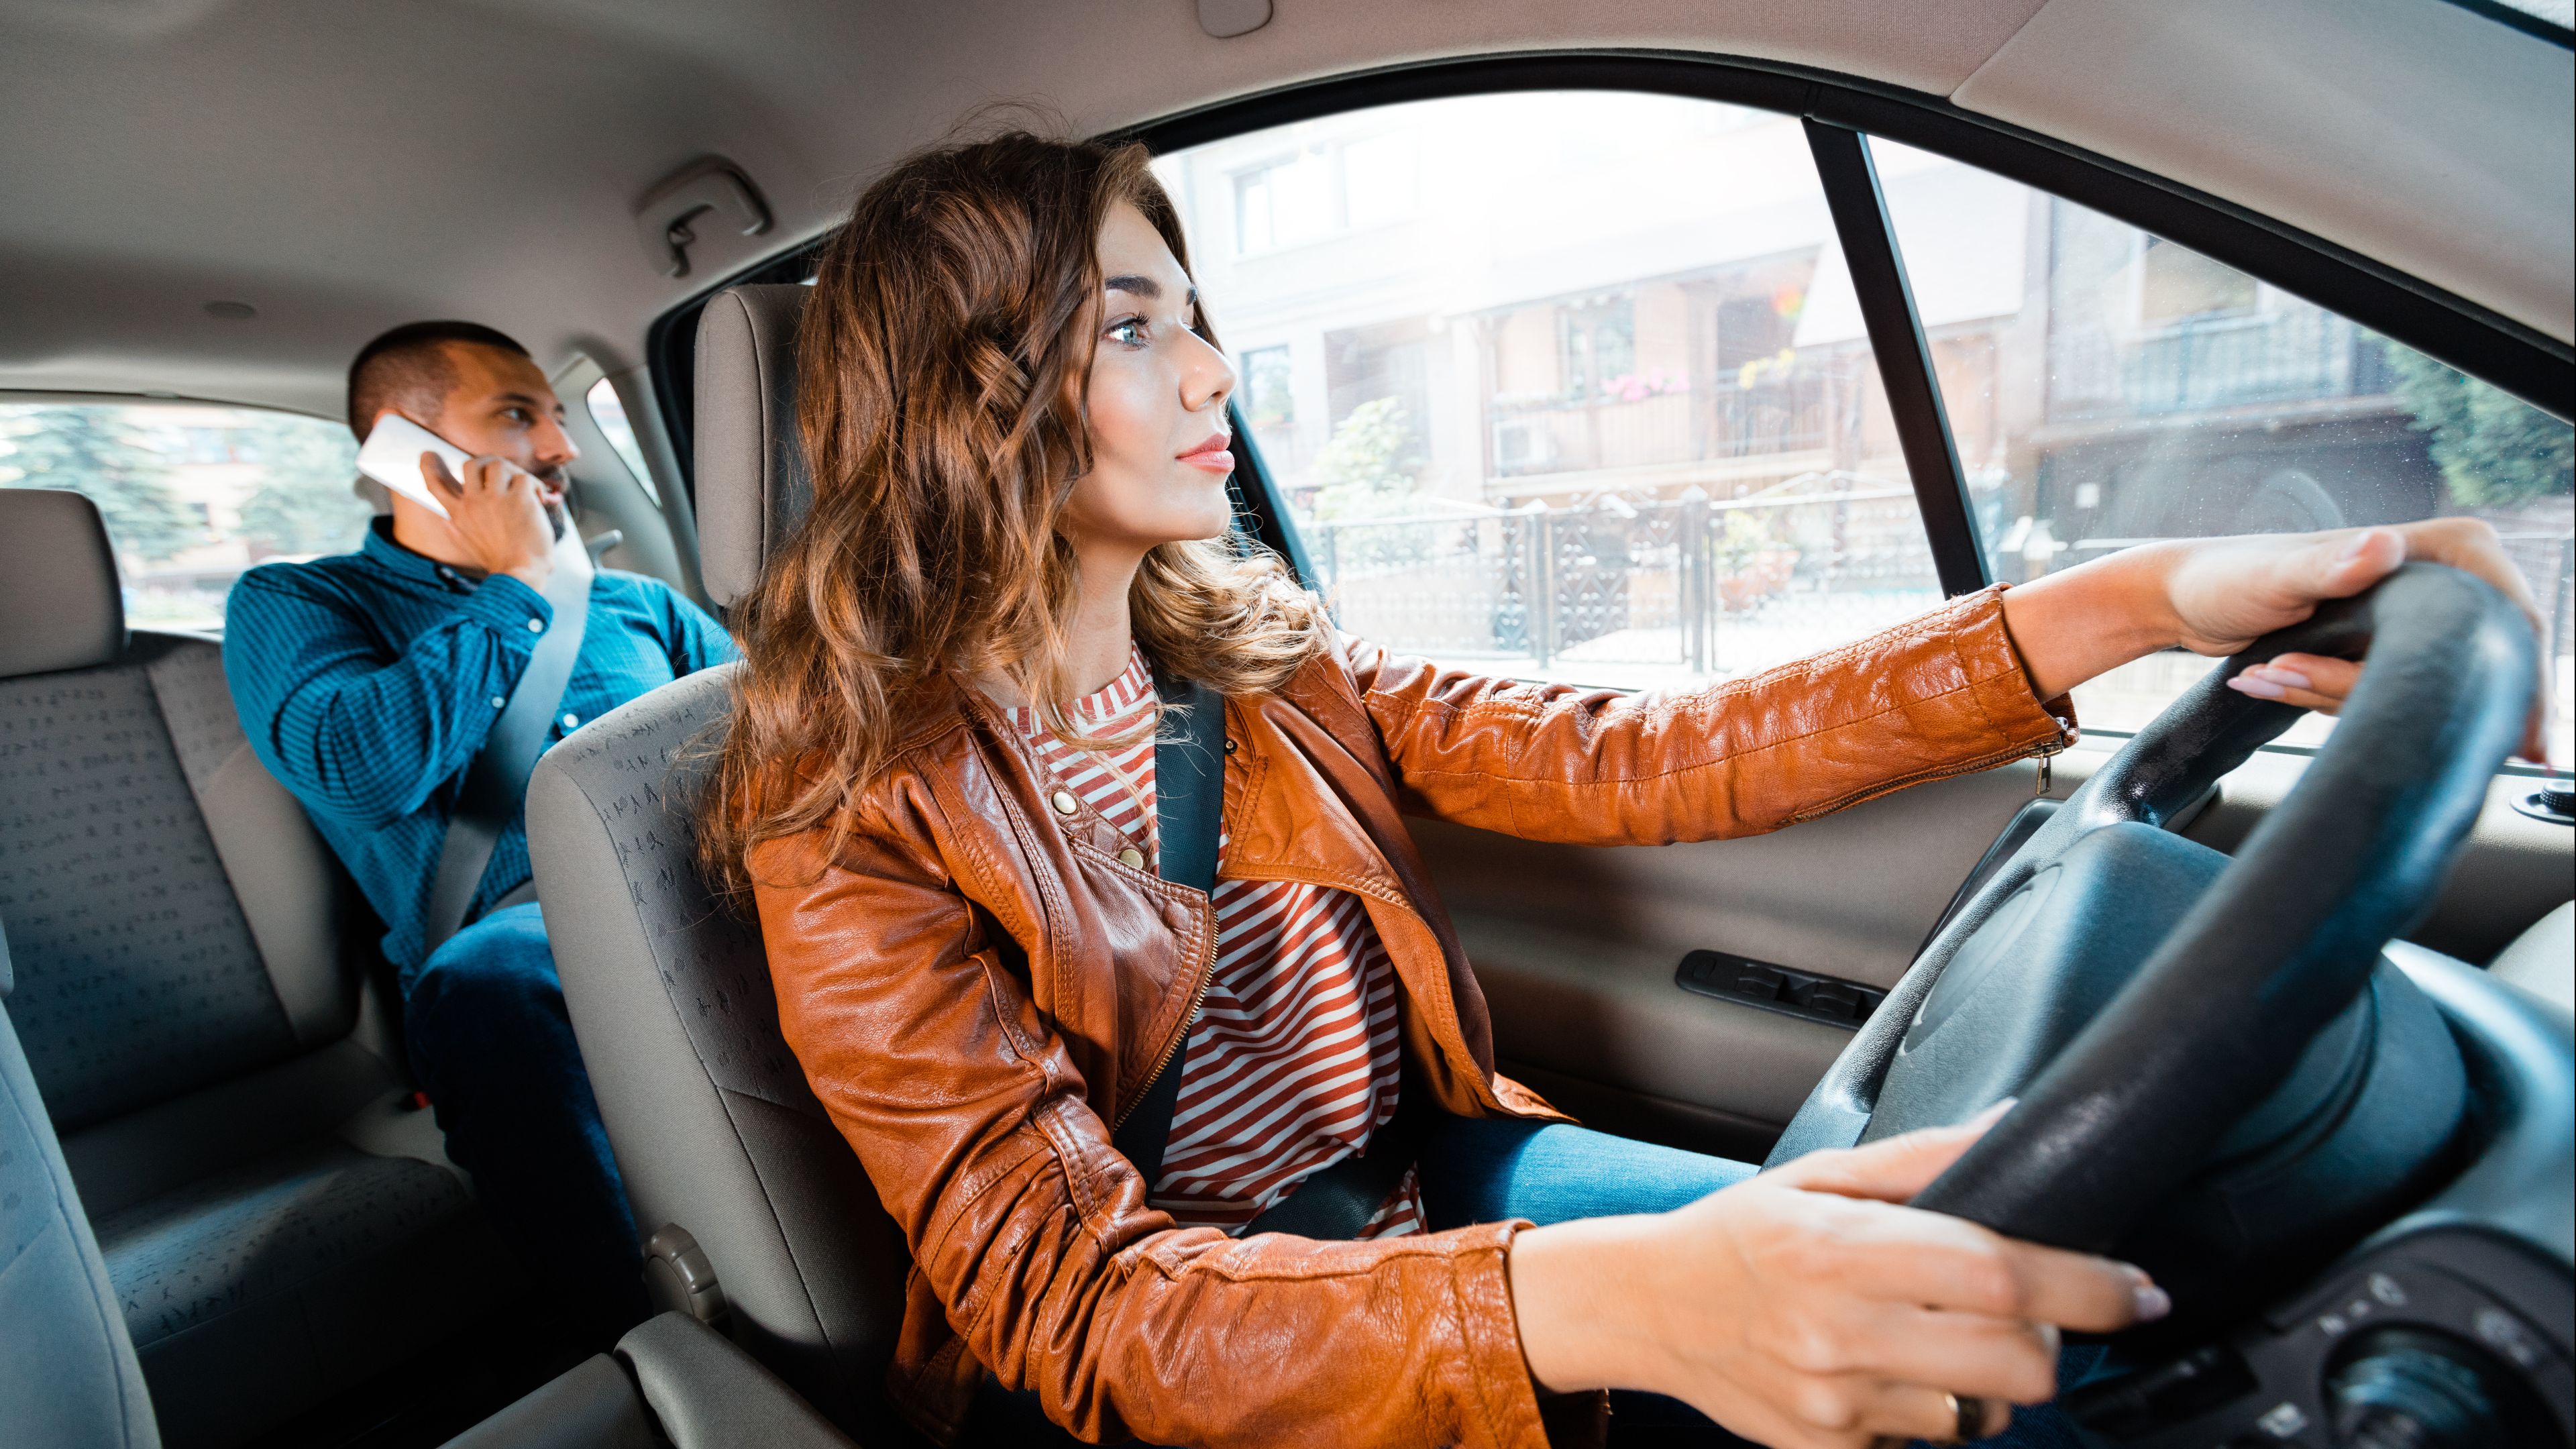 The Uber driver's guide to renting with Hertz | Hertz Blog